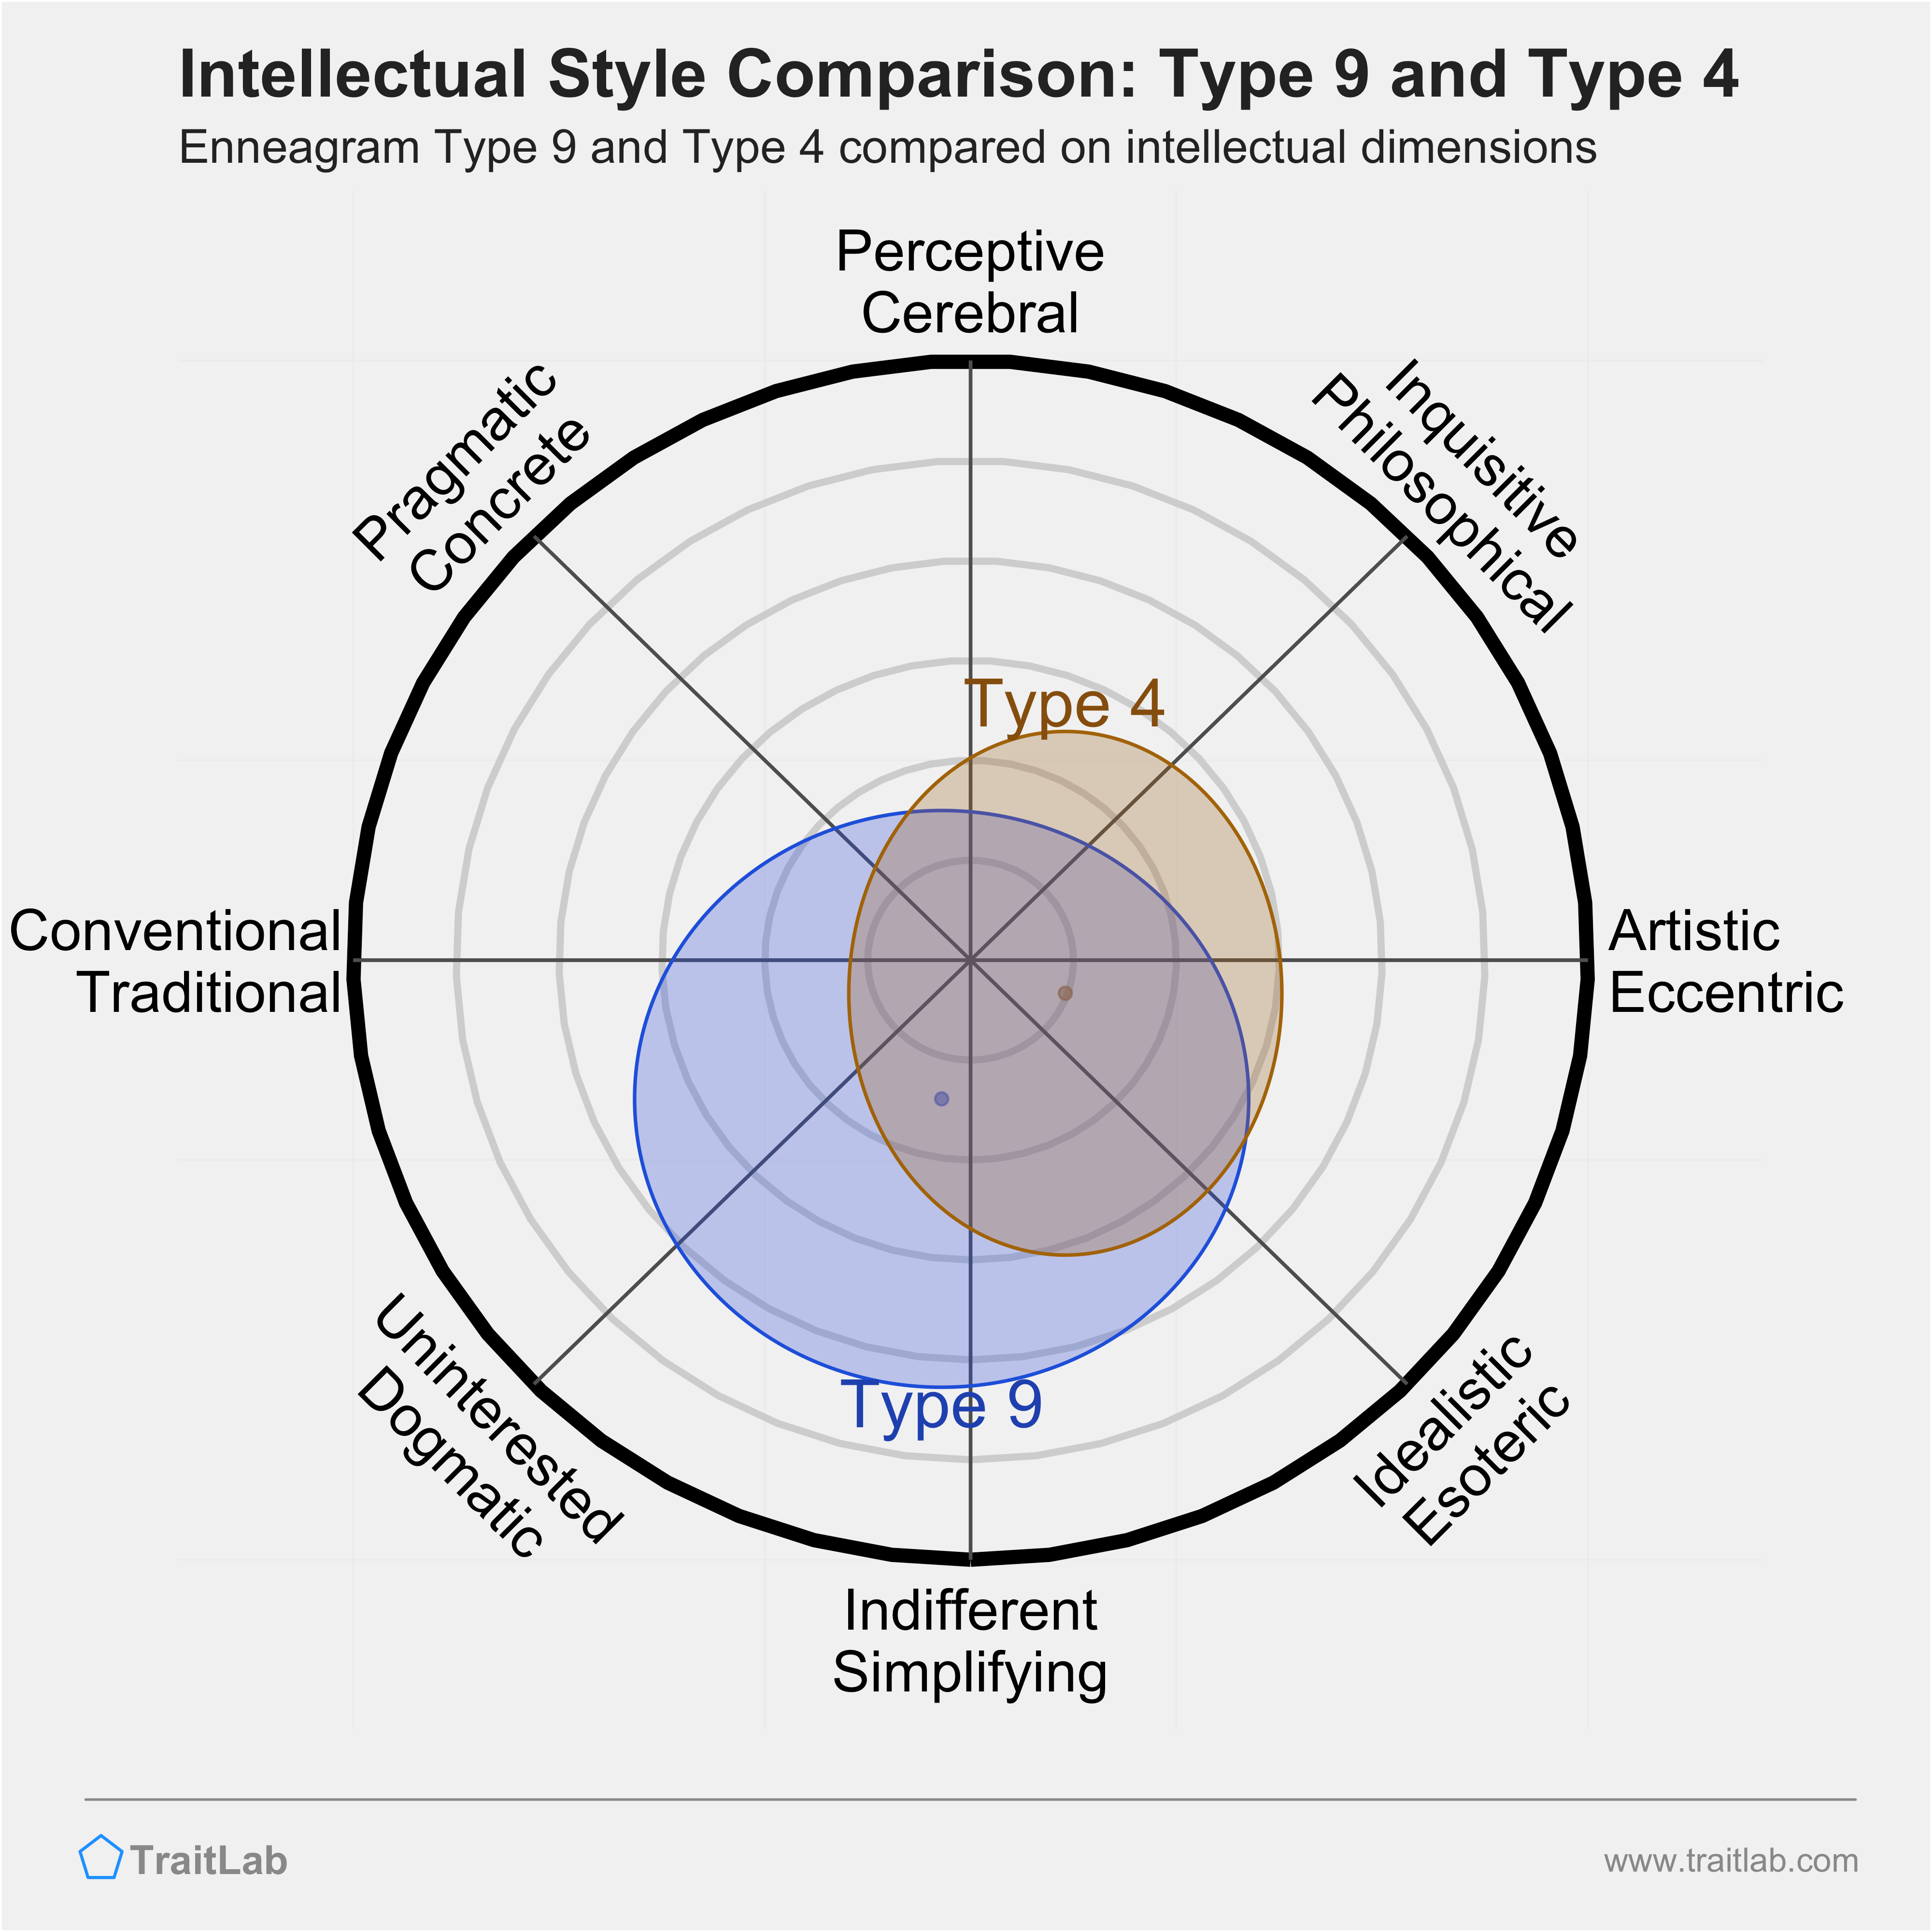 Type 9 and Type 4 comparison across intellectual dimensions